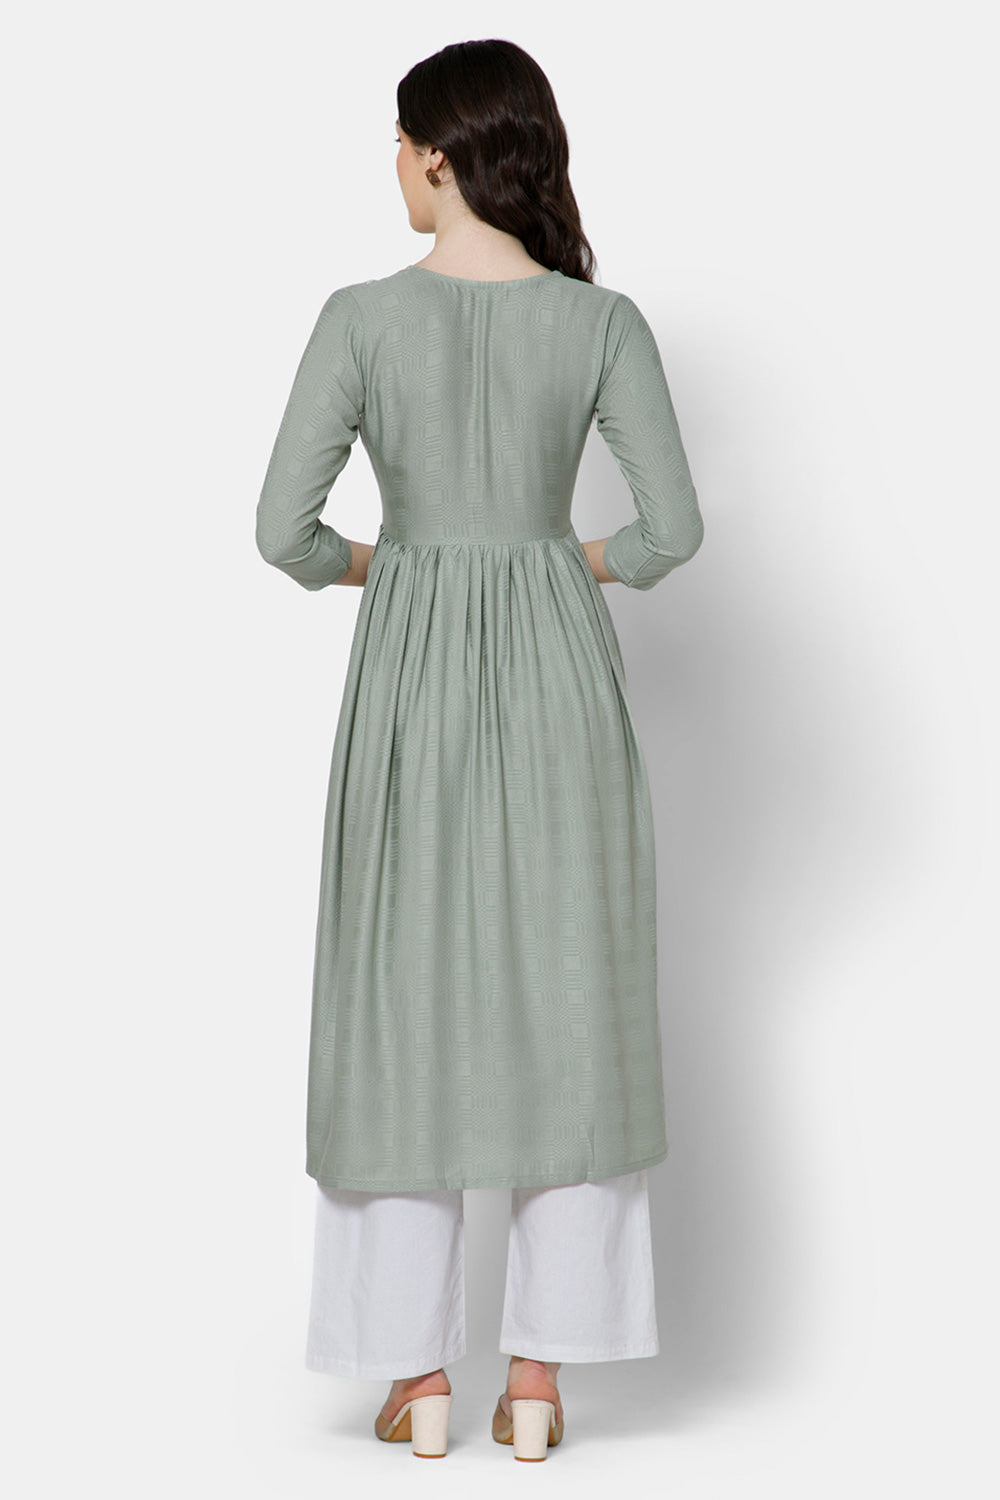 Mythri Women's Ethnic wear Kurthi with Elegant Lace Attachment At The Neckline - Green - E080